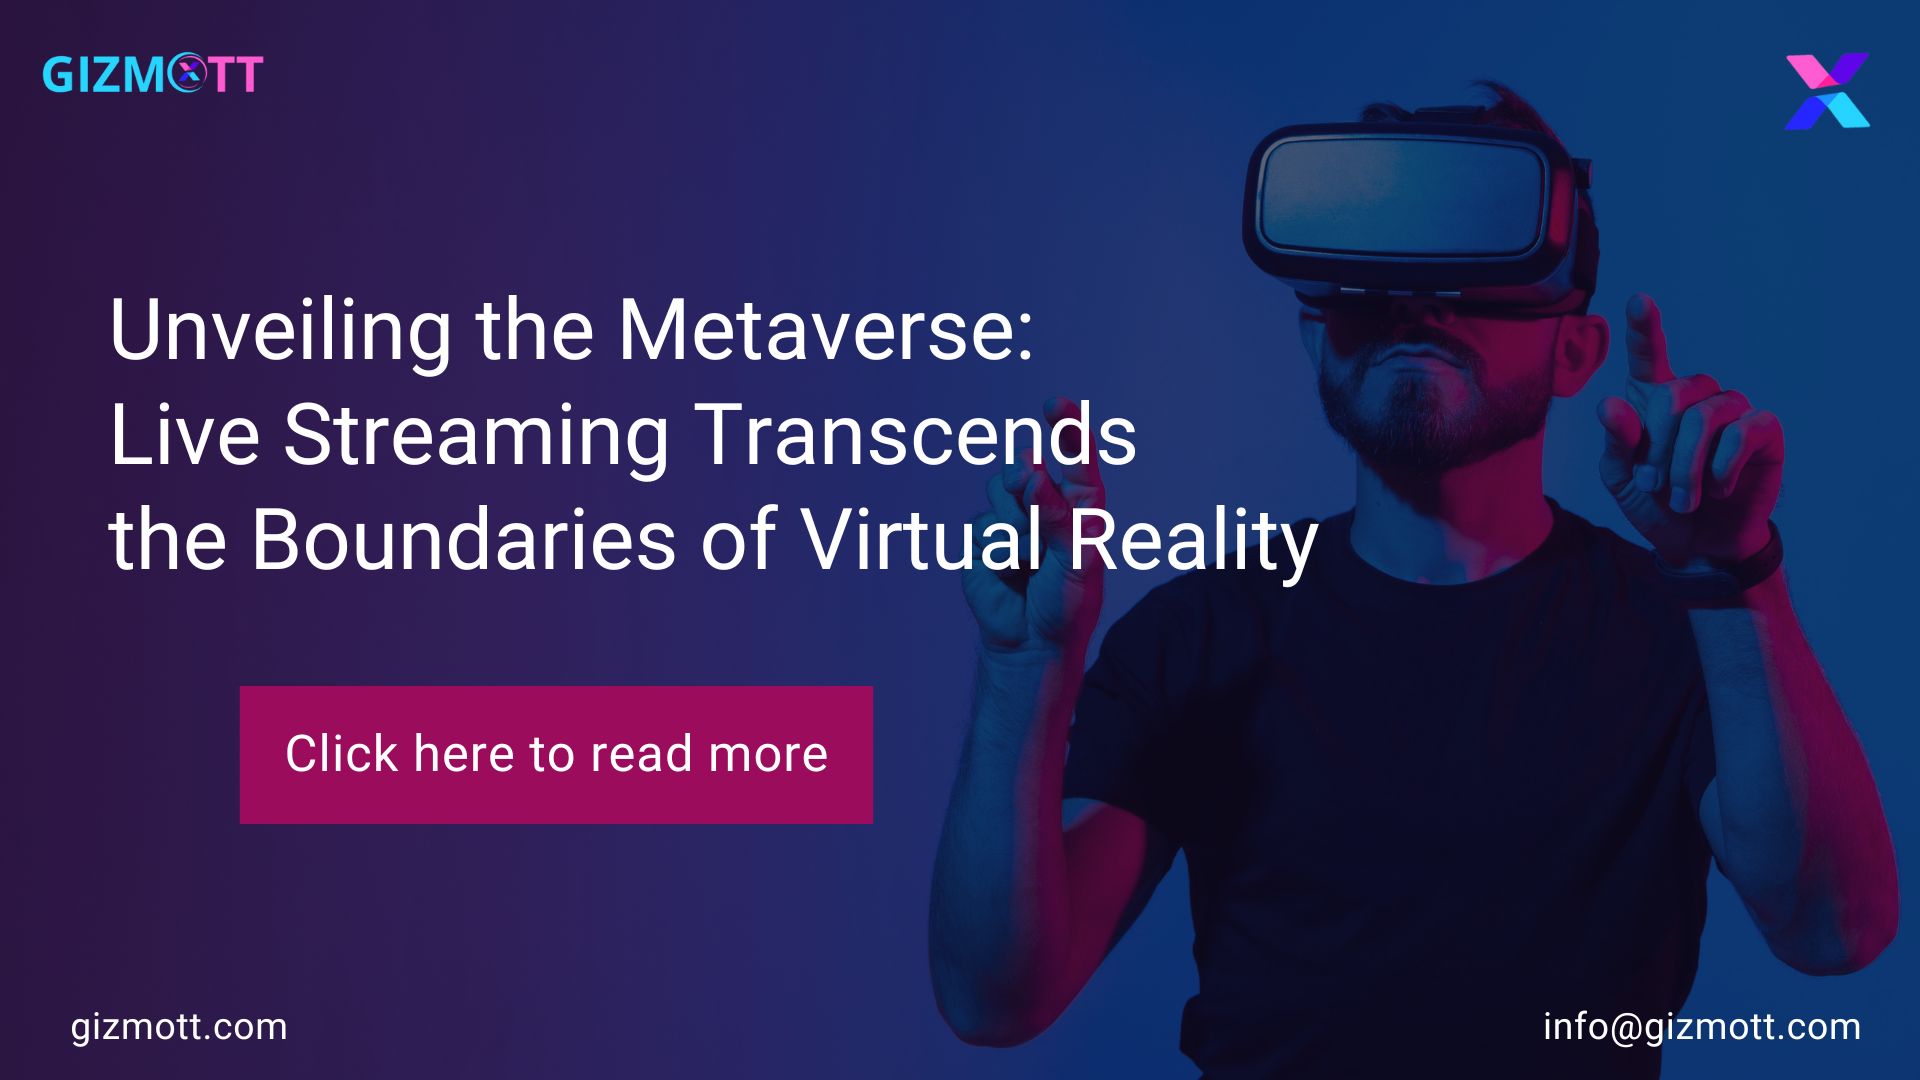 Unveiling the Metaverse: Live Streaming Transcends the Boundaries of Virtual Reality